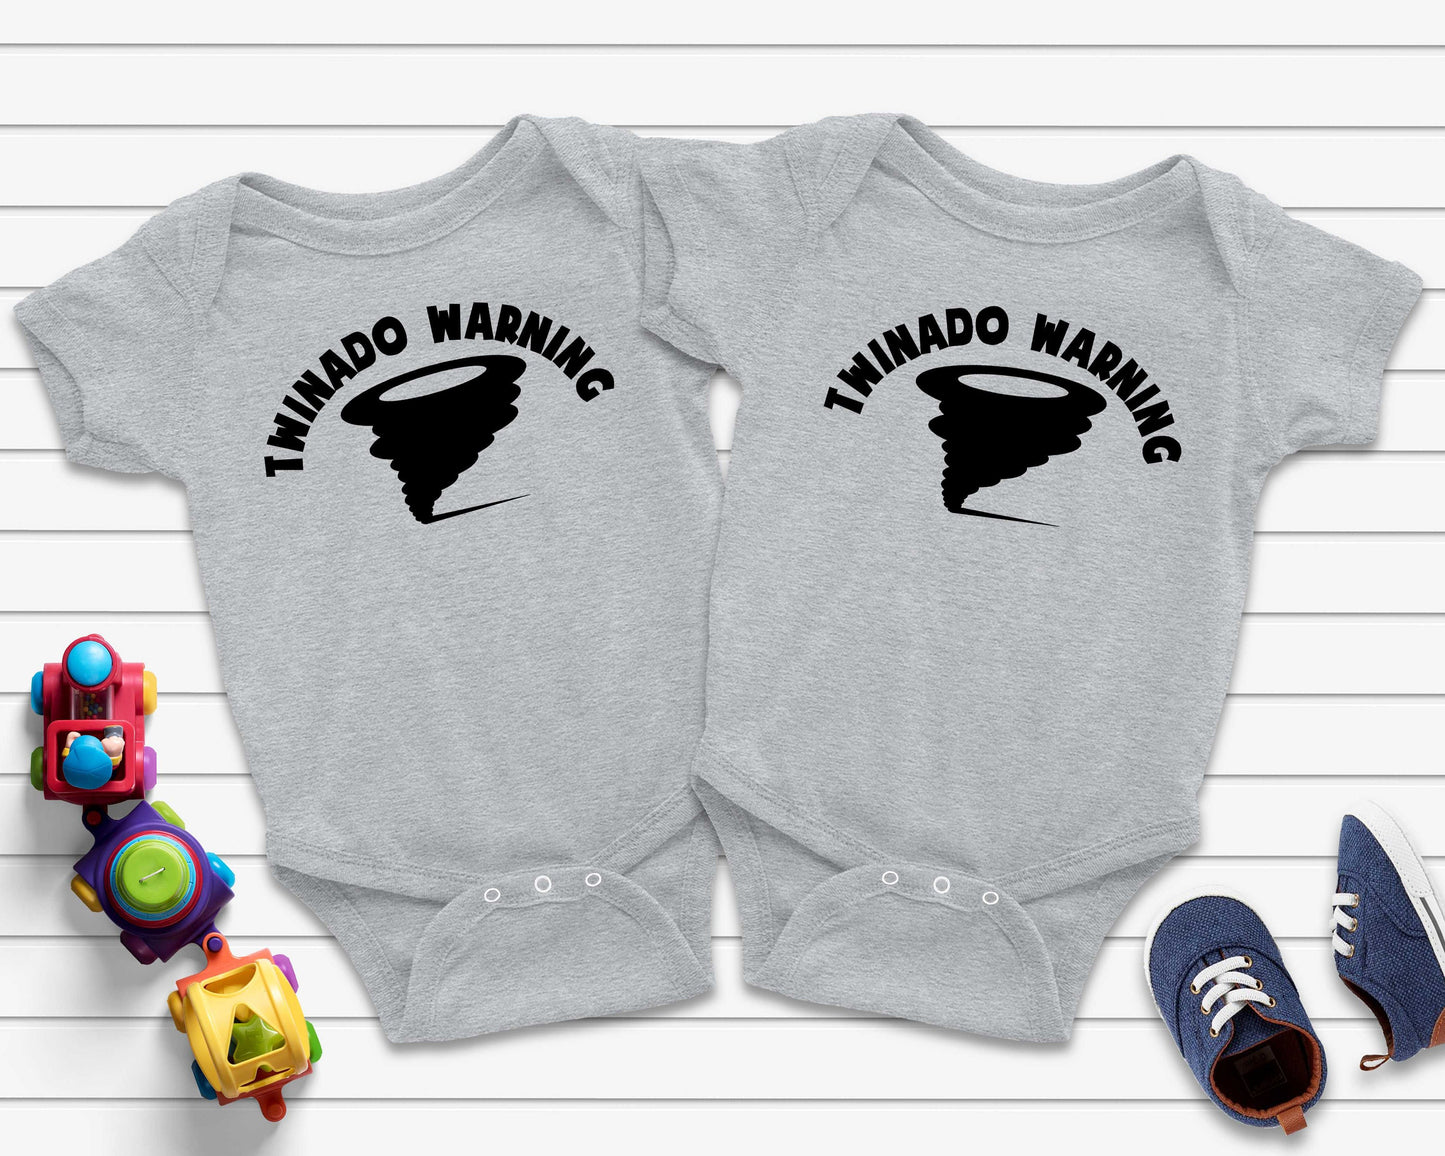 Twinado Warning T-Shirts or Bodysuits for Twins - Identical Twins - Twin Tees - Fraternal Twins - Shirts for Twins - Twin Toddler Shirts